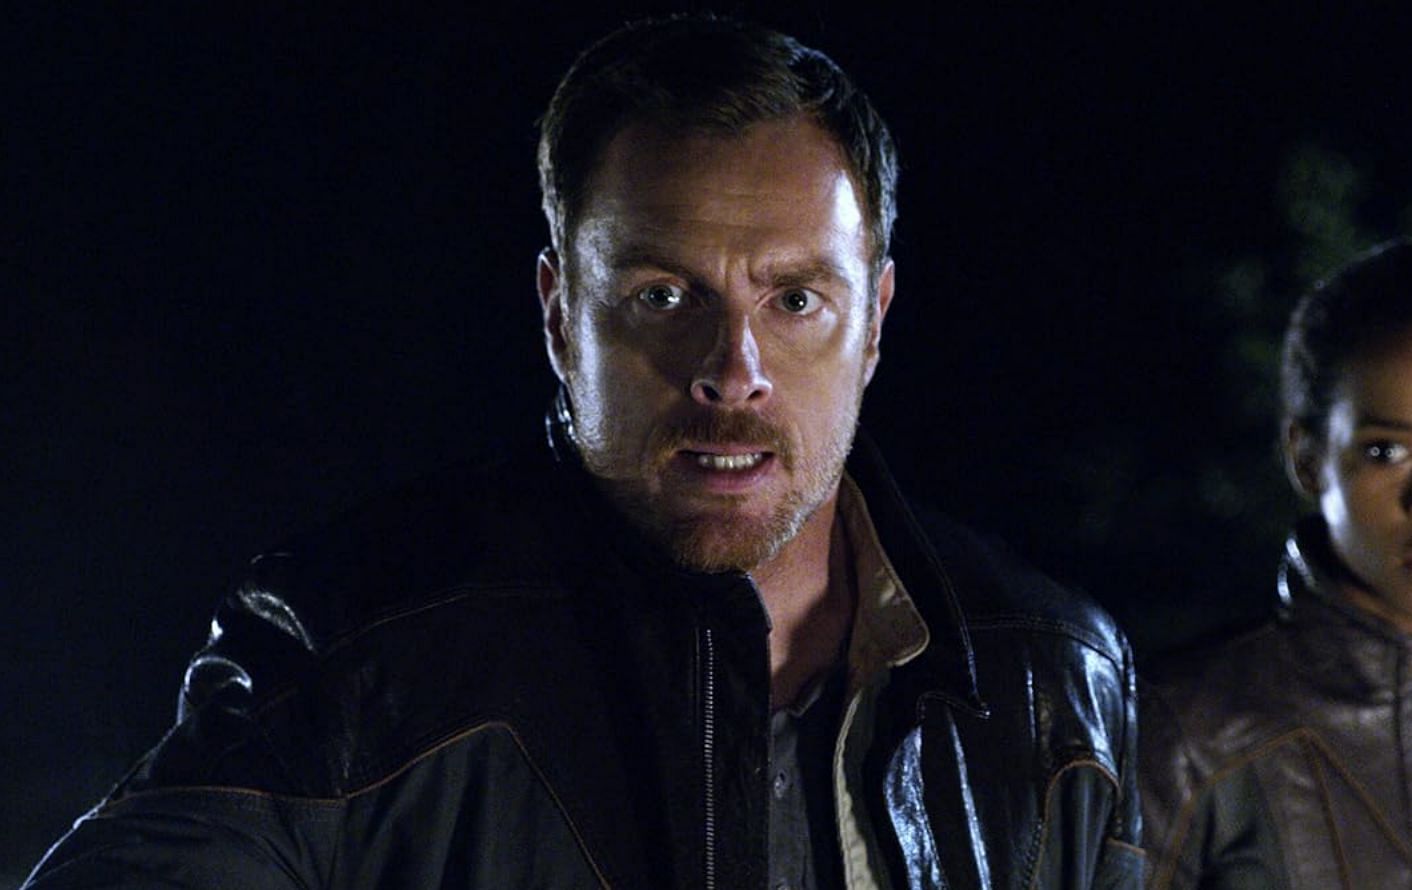 Toby Stephens, who plays Poseidon in Percy Jackson and the Olympians (Image via Netflix)